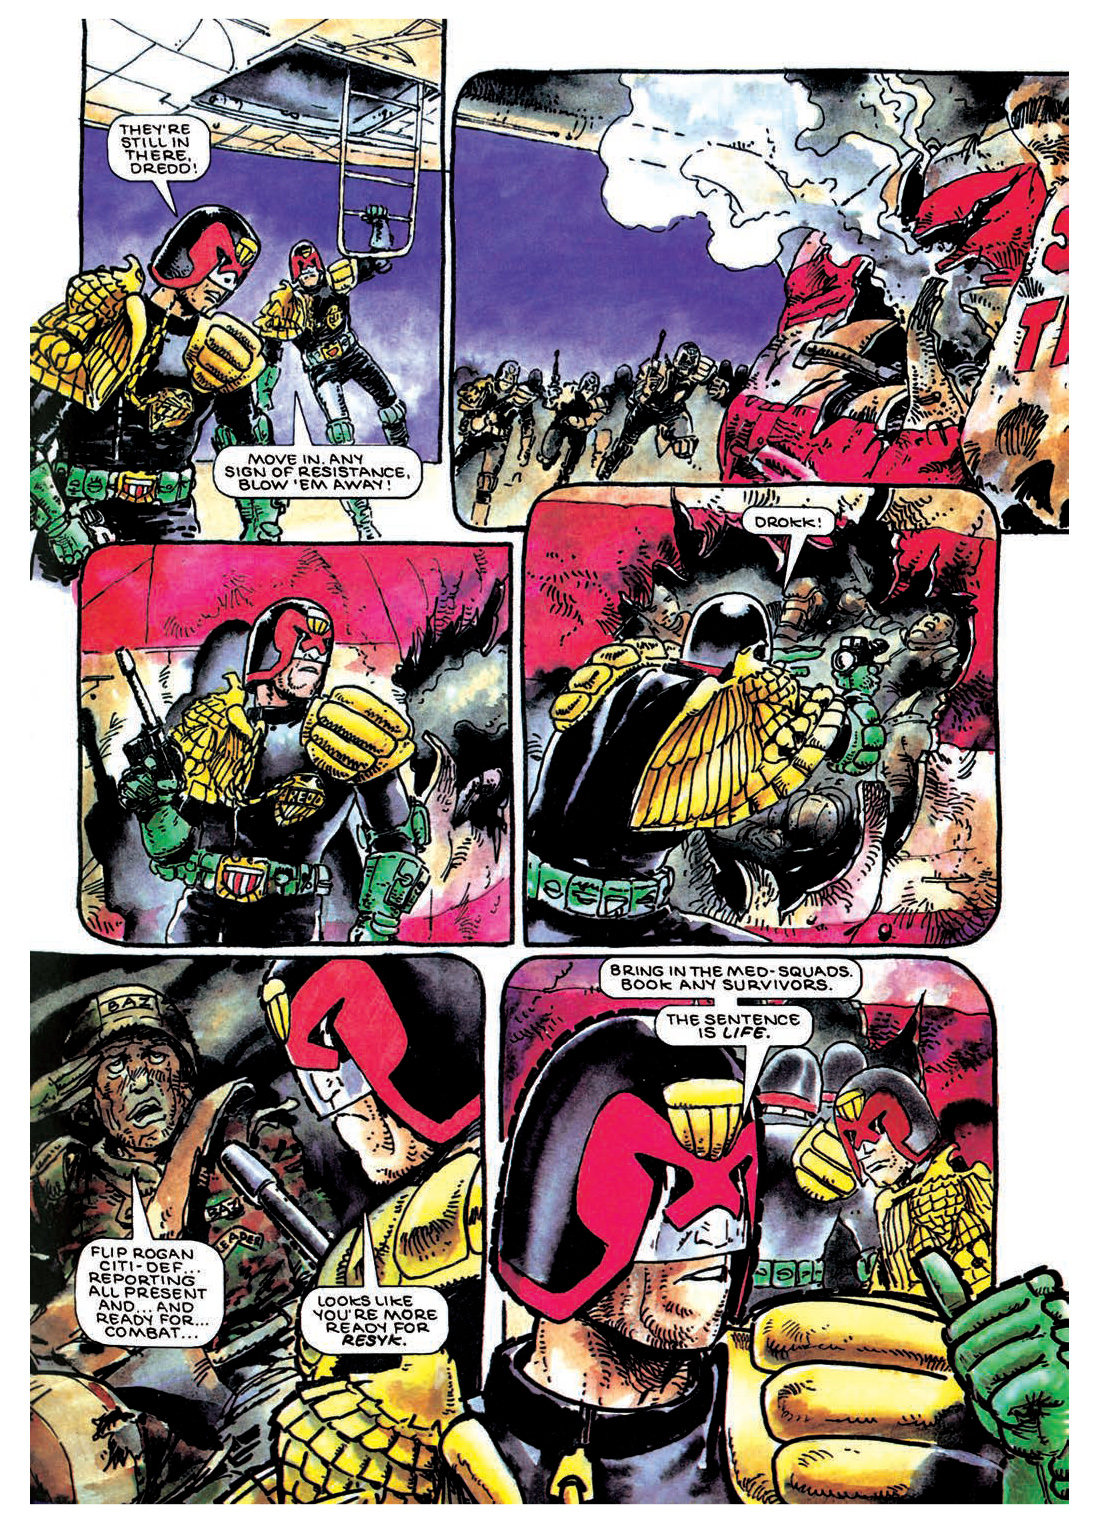 Read online Judge Dredd: The Restricted Files comic -  Issue # TPB 2 - 44